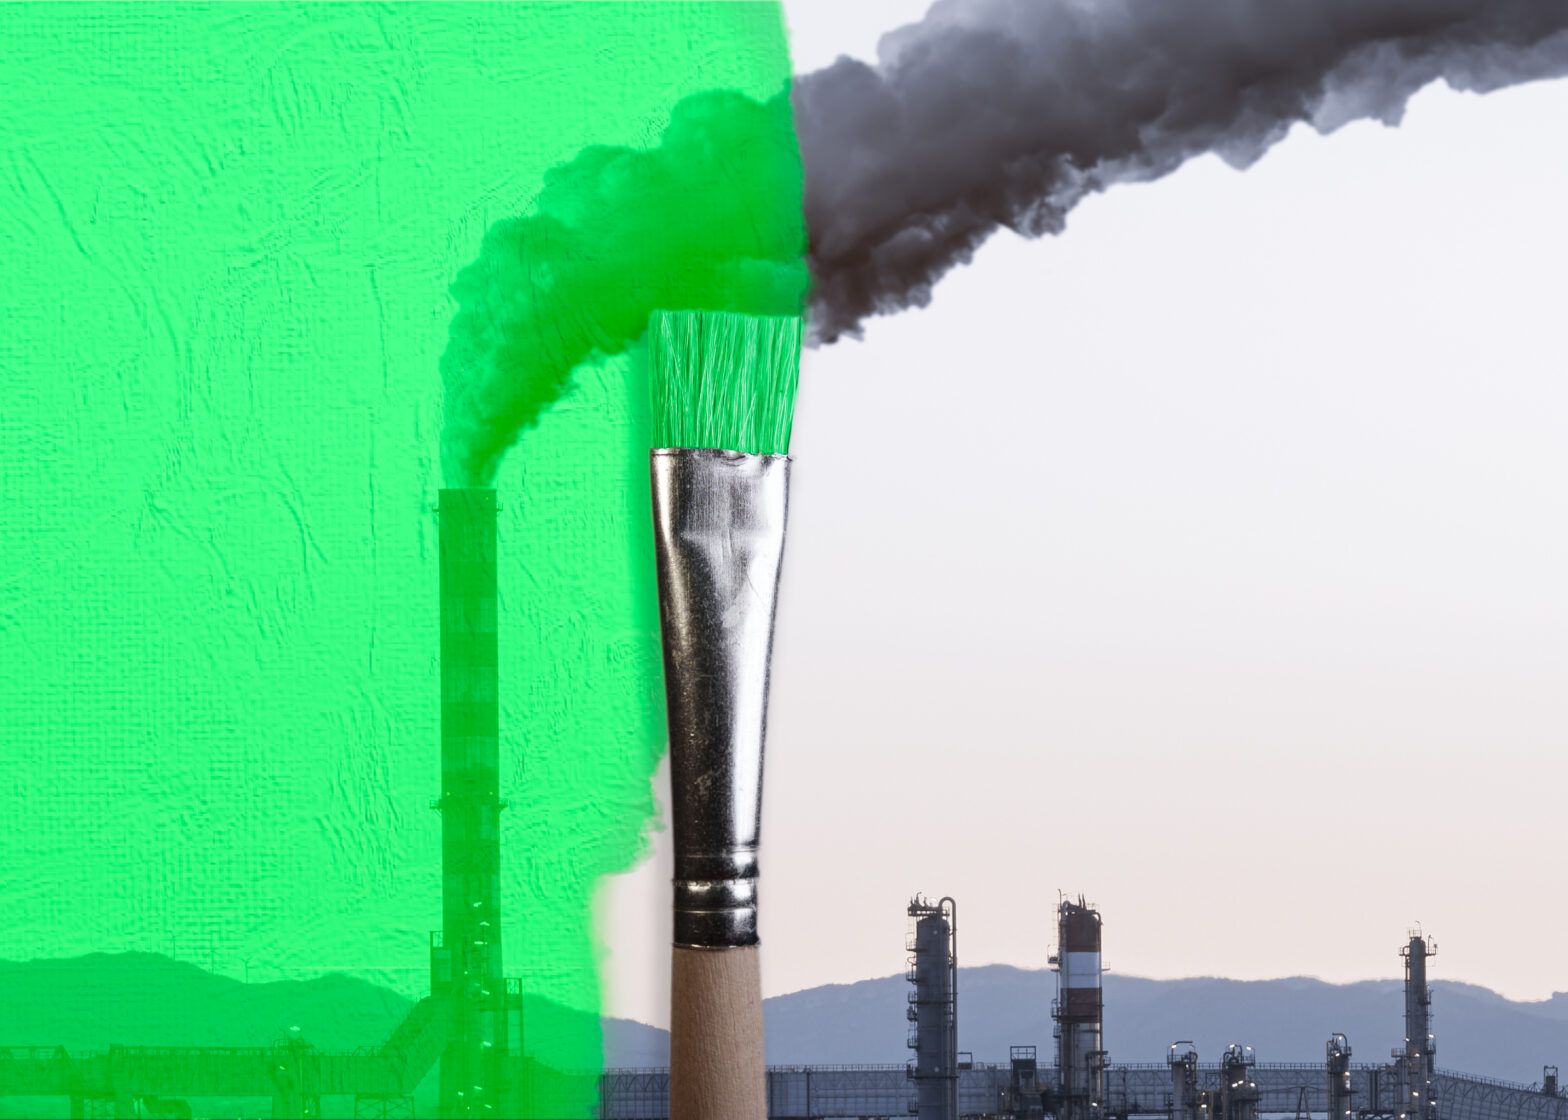 Greenwashing claims as half of Article 9 funds invest in fossil fuels